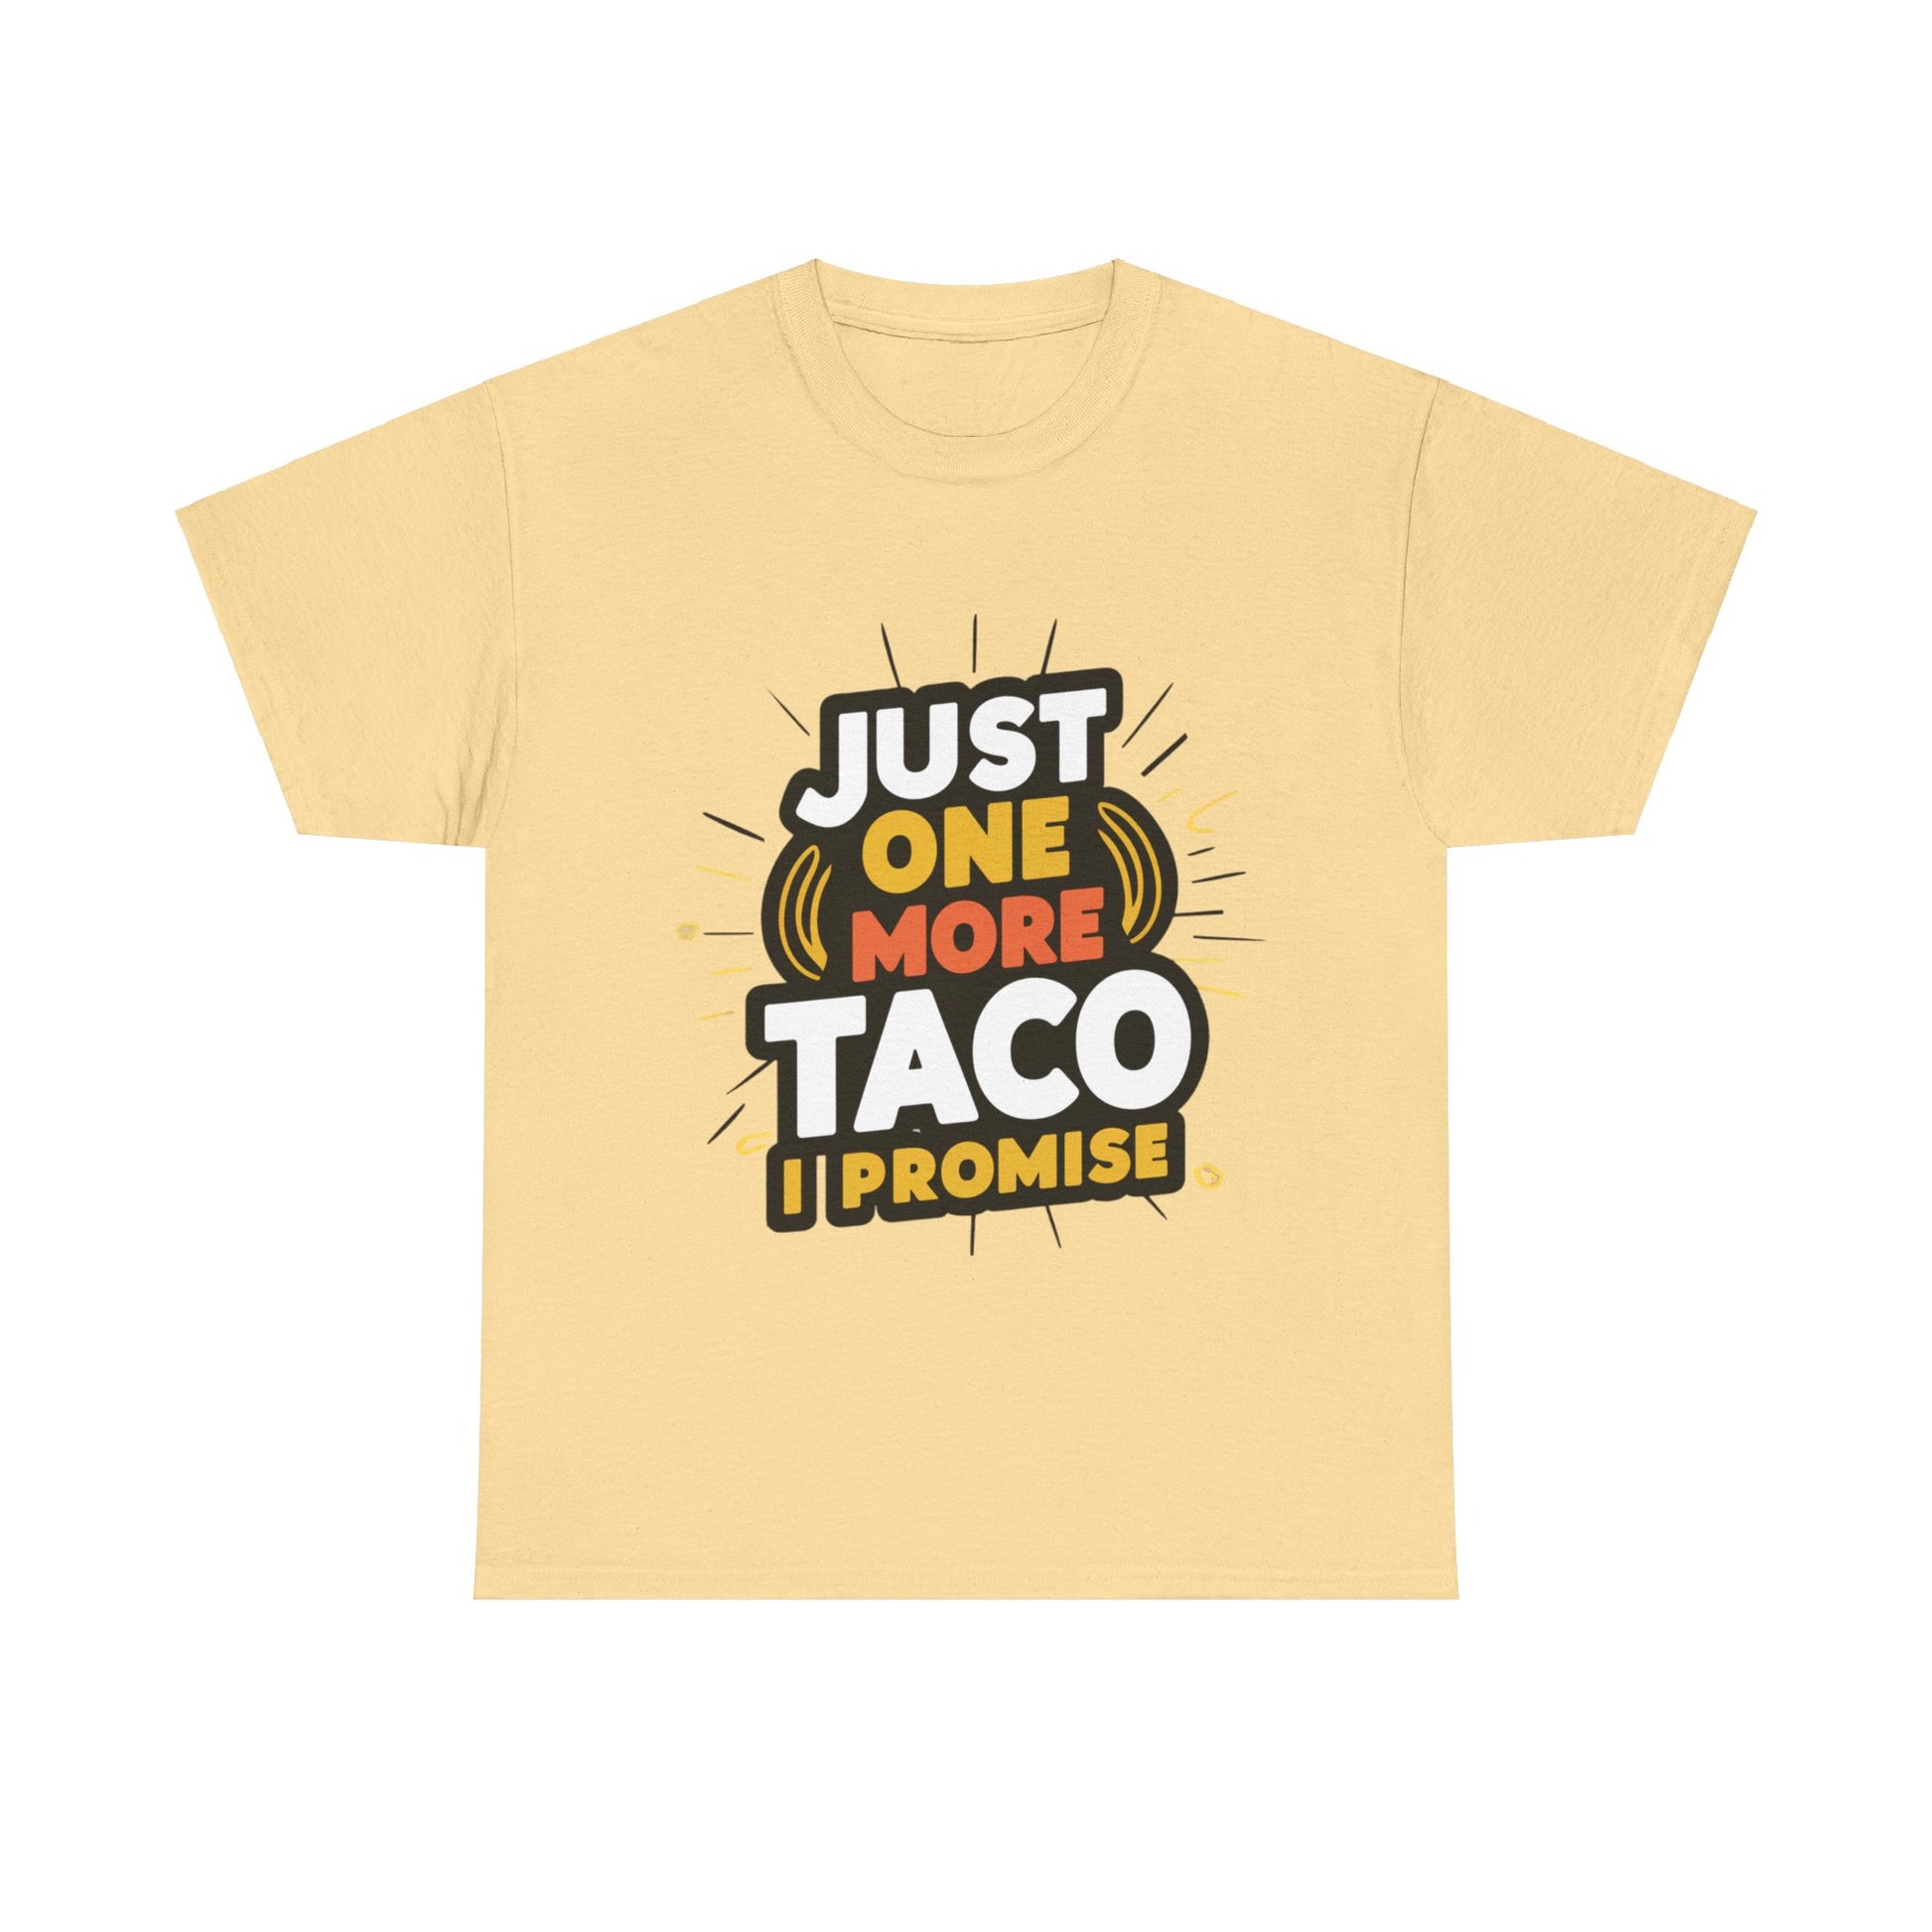 Just One More Taco I Promise Mexican Food Graphic Unisex Heavy Cotton Tee Cotton Funny Humorous Graphic Soft Premium Unisex Men Women Yellow Haze T-shirt Birthday Gift-11